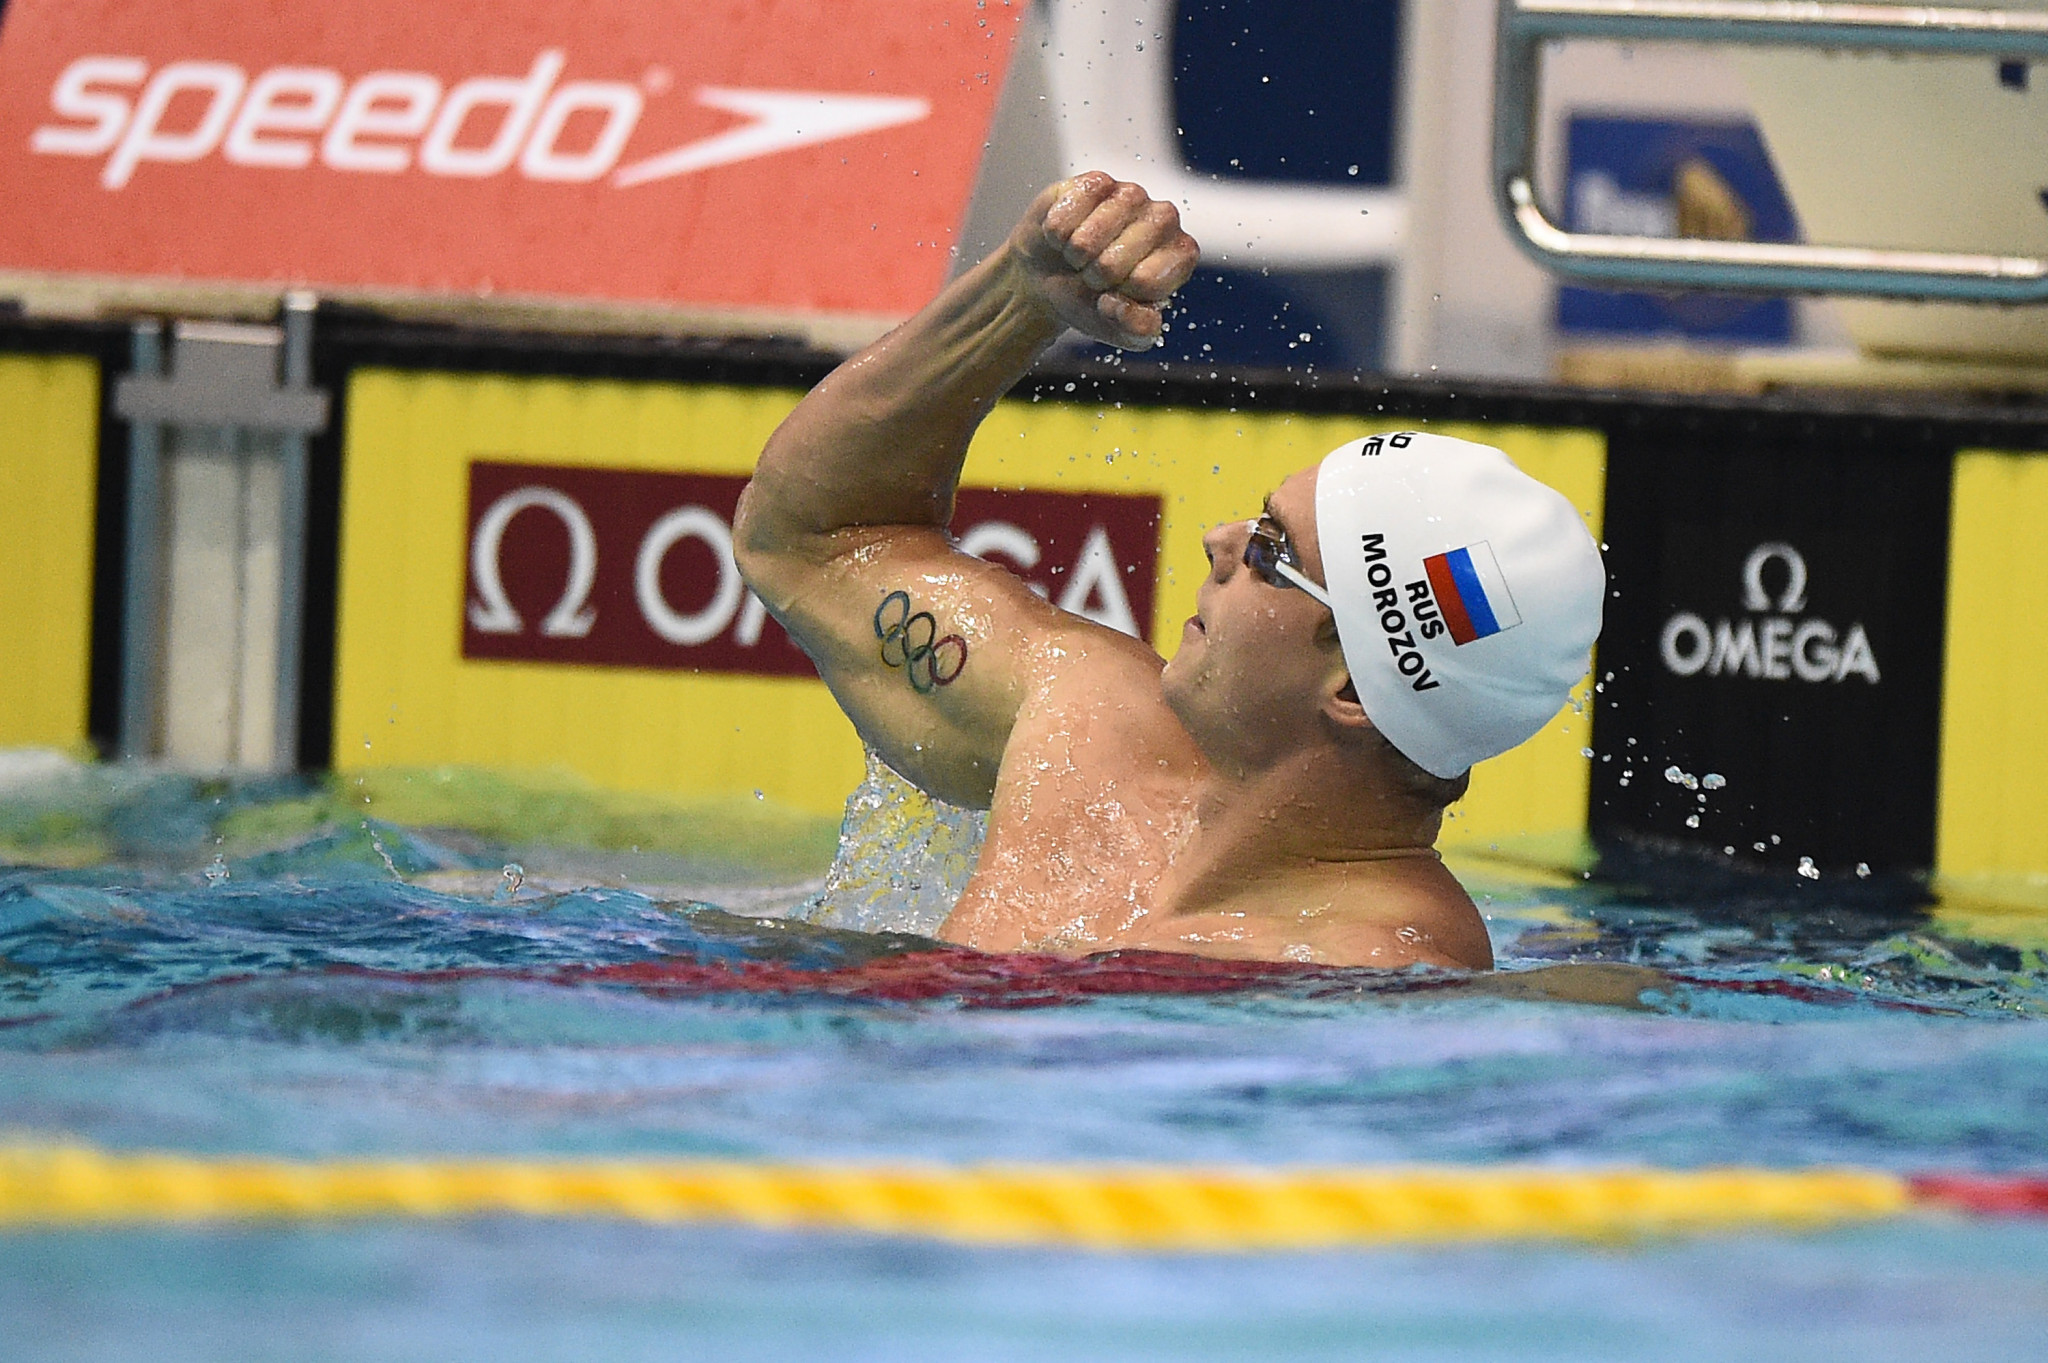 Vladimir Morozov became only the second man in history to swim under 45 seconds for the 100 metres freestyle today ©Getty Images